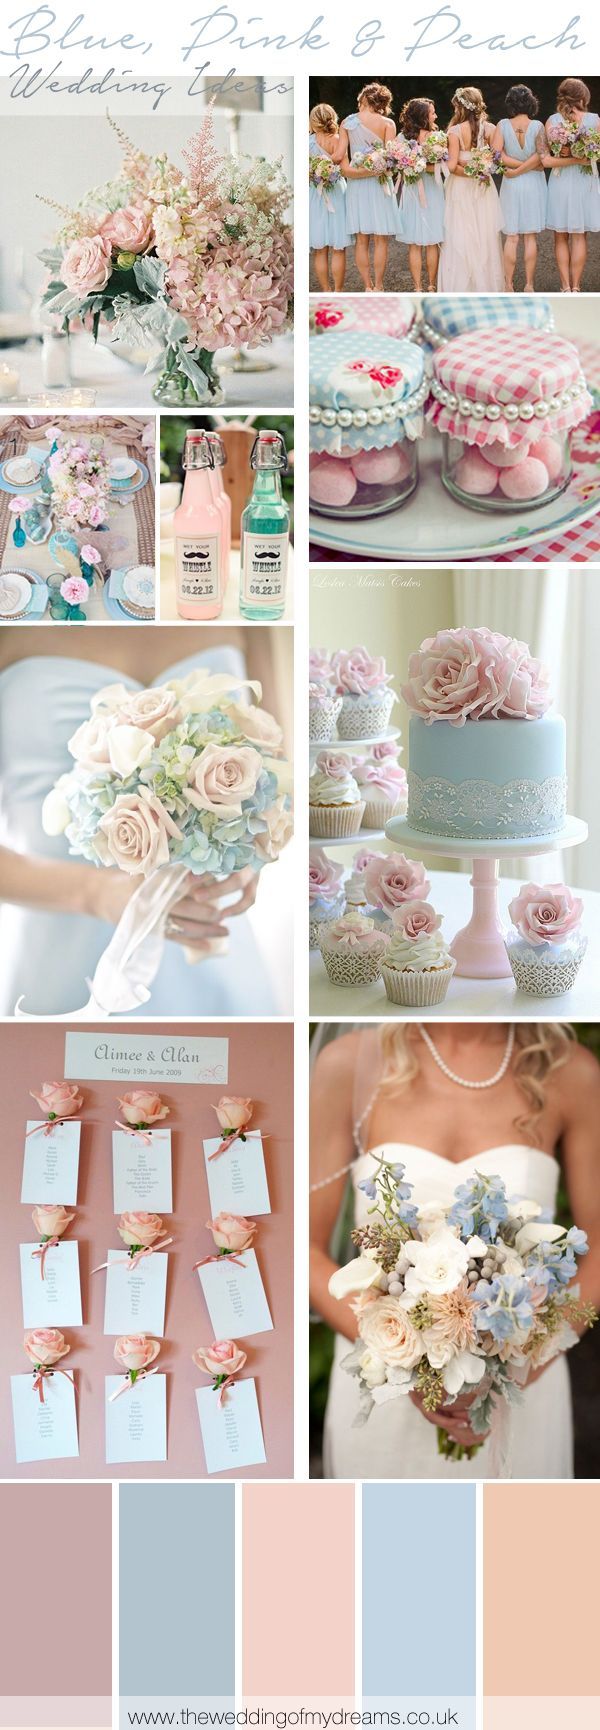 Blue, Pink And Peach Wedding Inspiration and Ideas